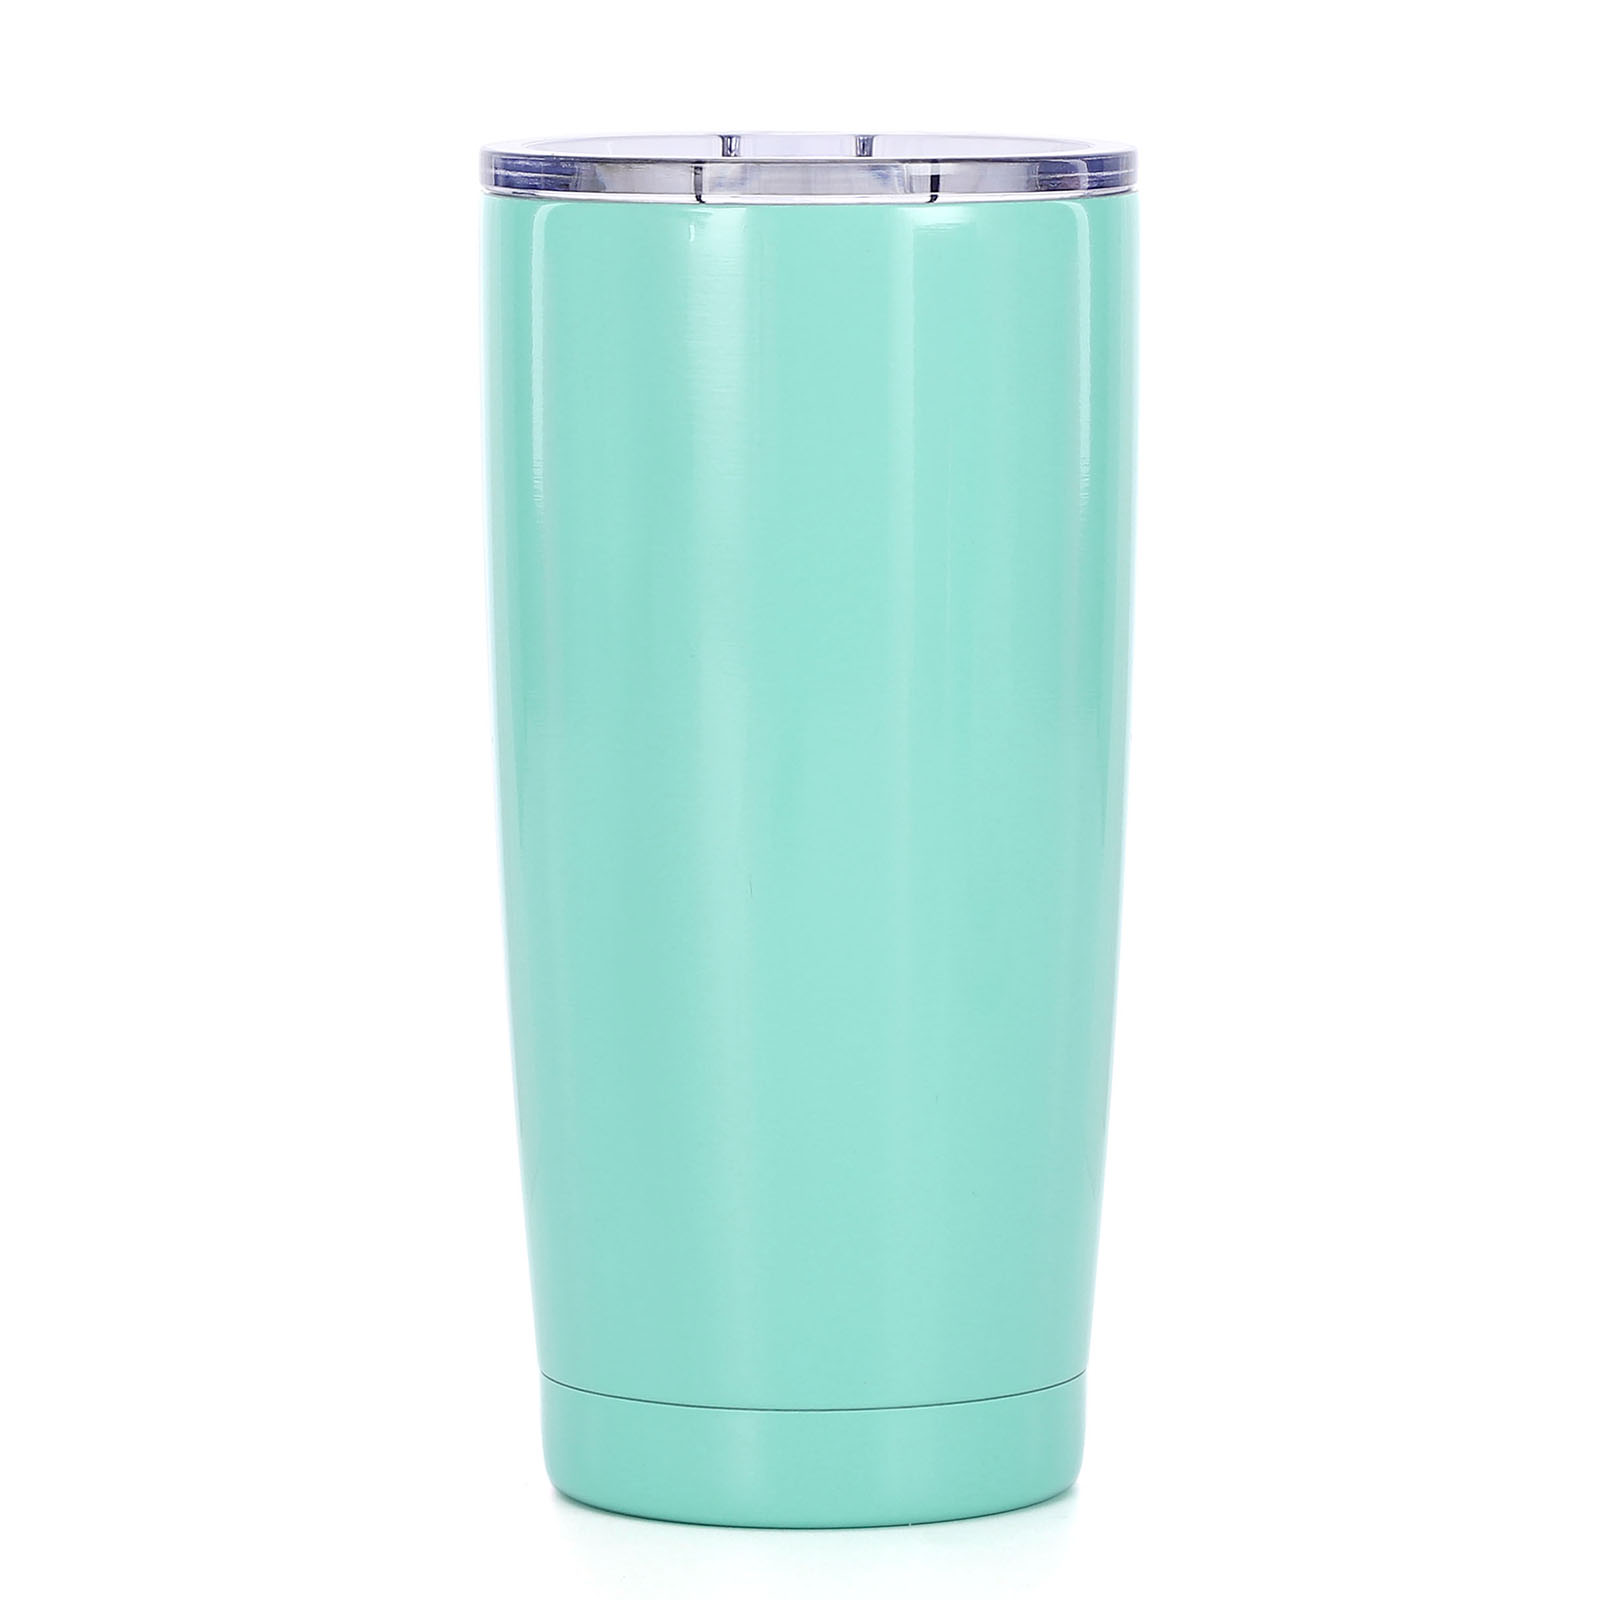 Stainless Steel Double Wall Vacuum Insulated Tumbler 20oz - With